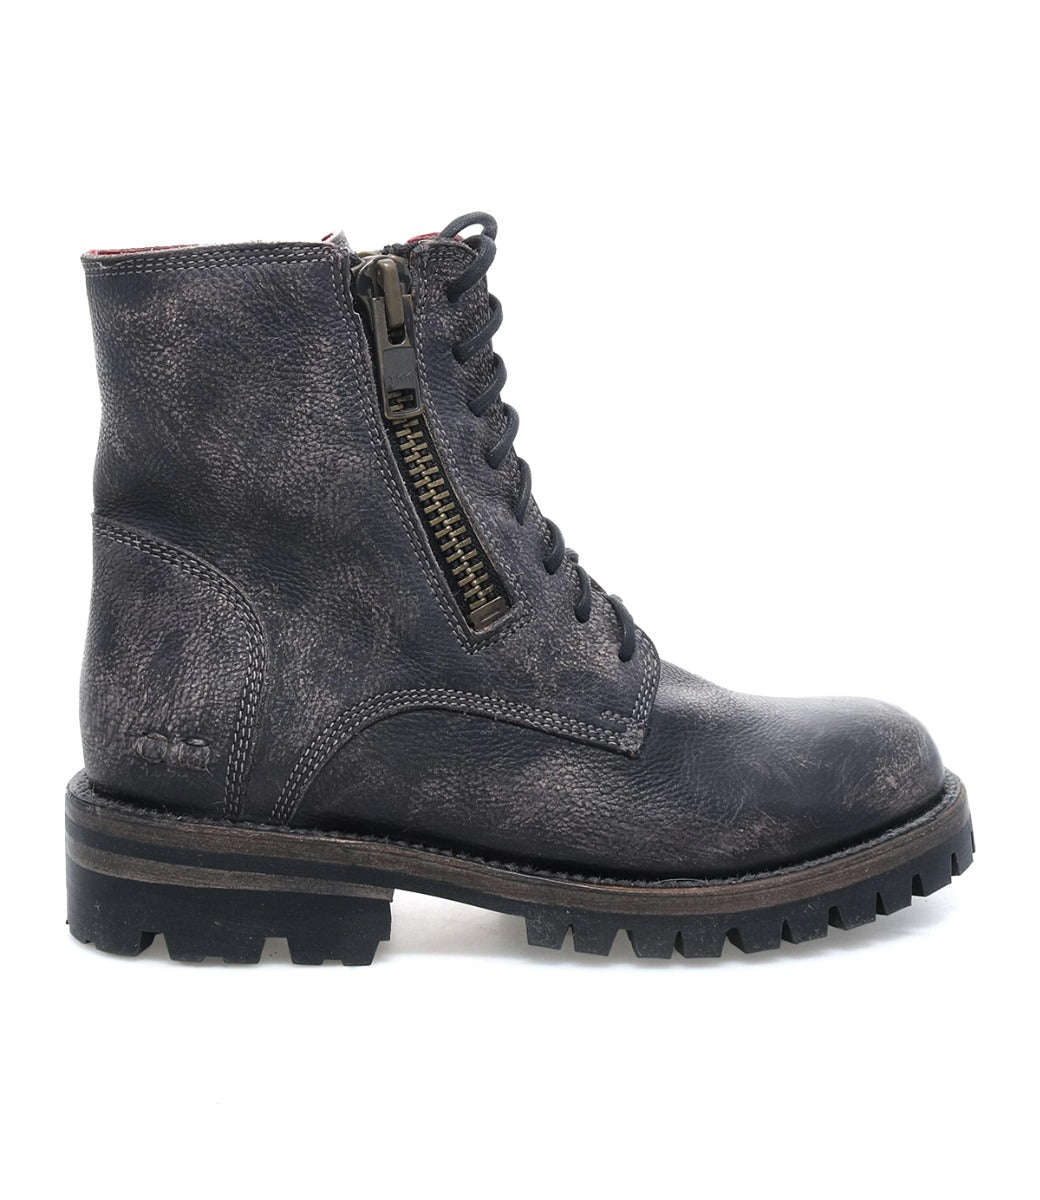 A Bed Stu Tactic Trek grey leather boot with a zipper on the side.